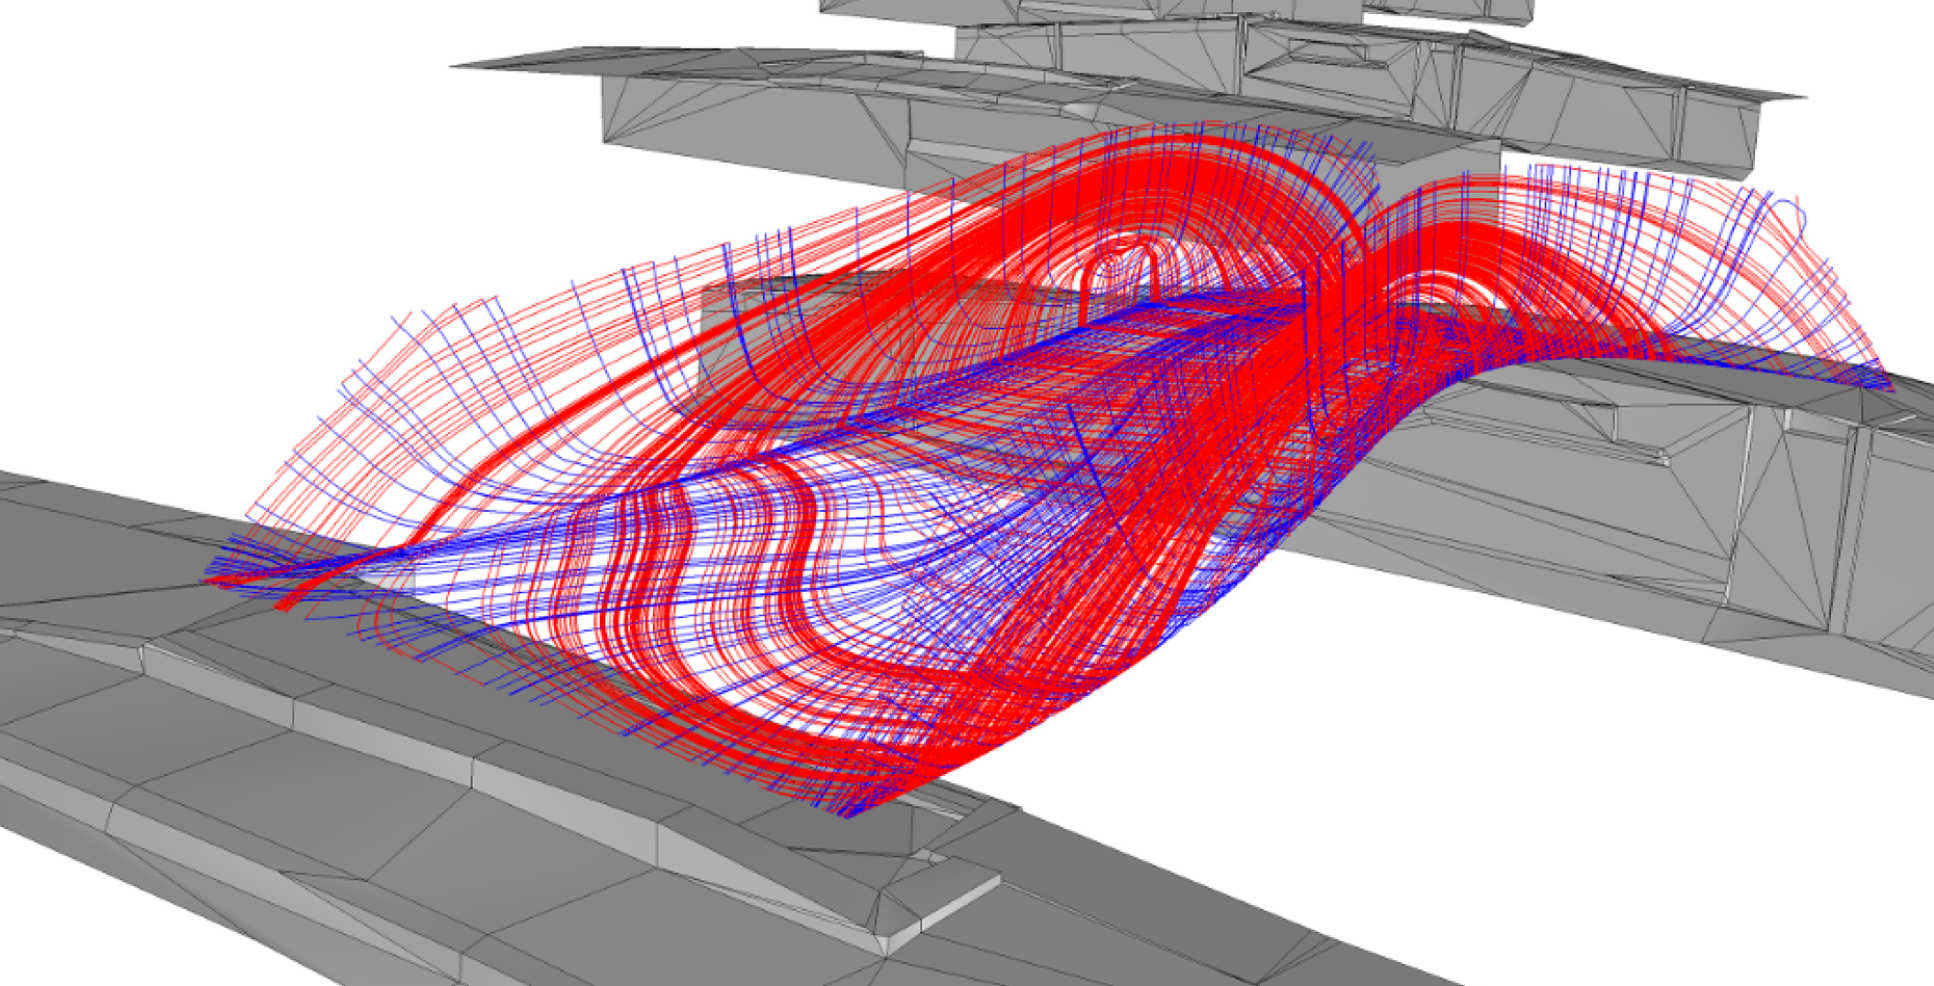 Model showing stress analysis on the bridge (image from Arup)